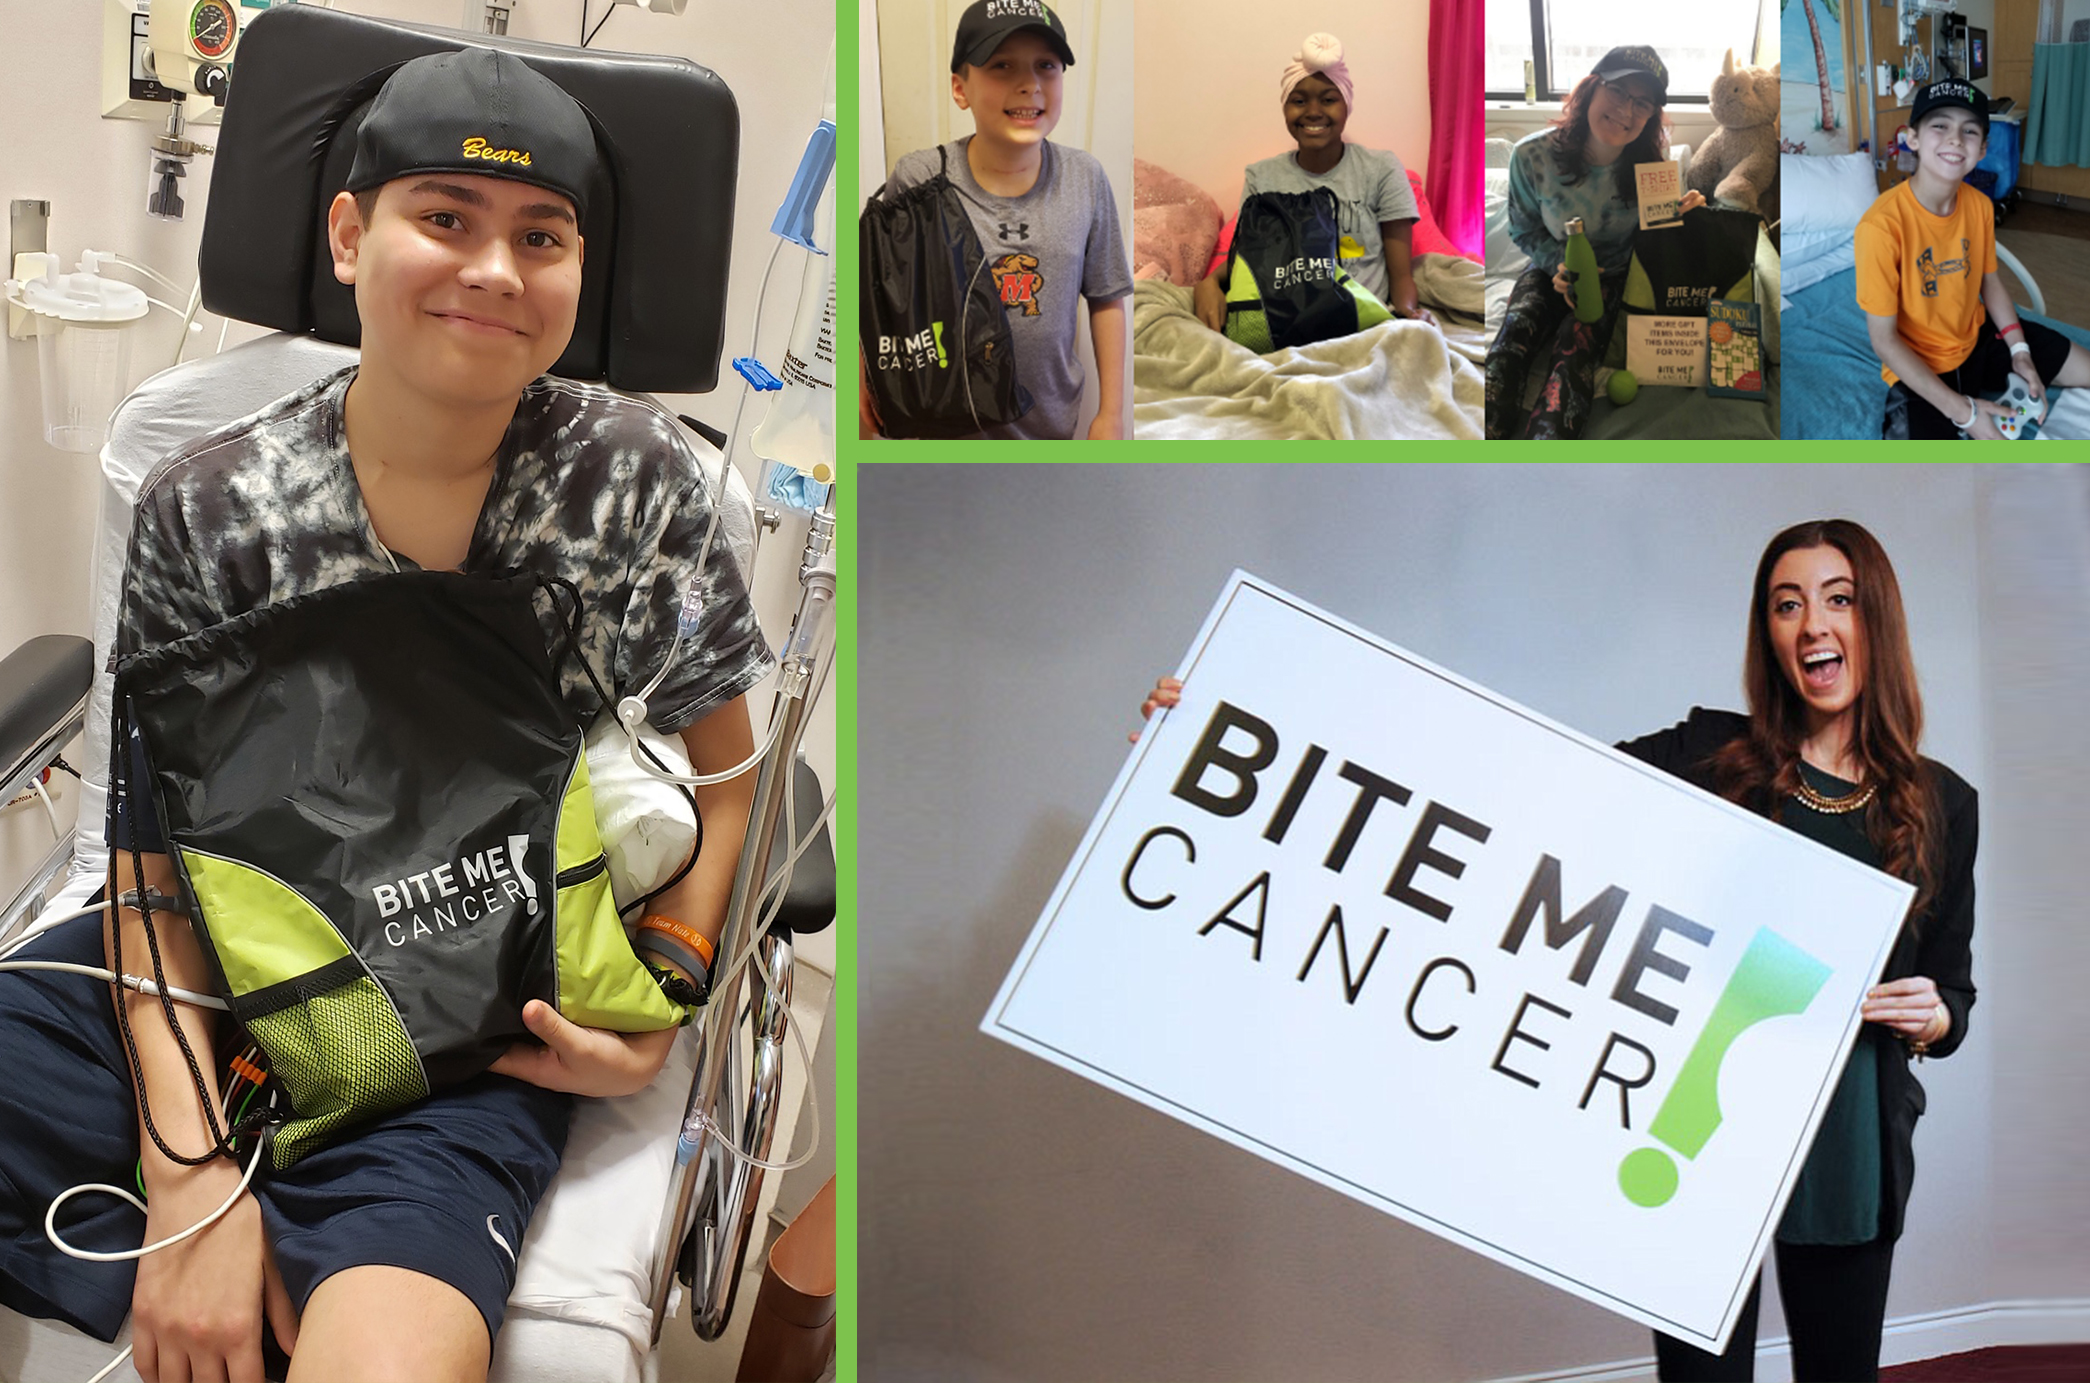 Collage of kids benefitting from the nonprofit Bite Me Cancer